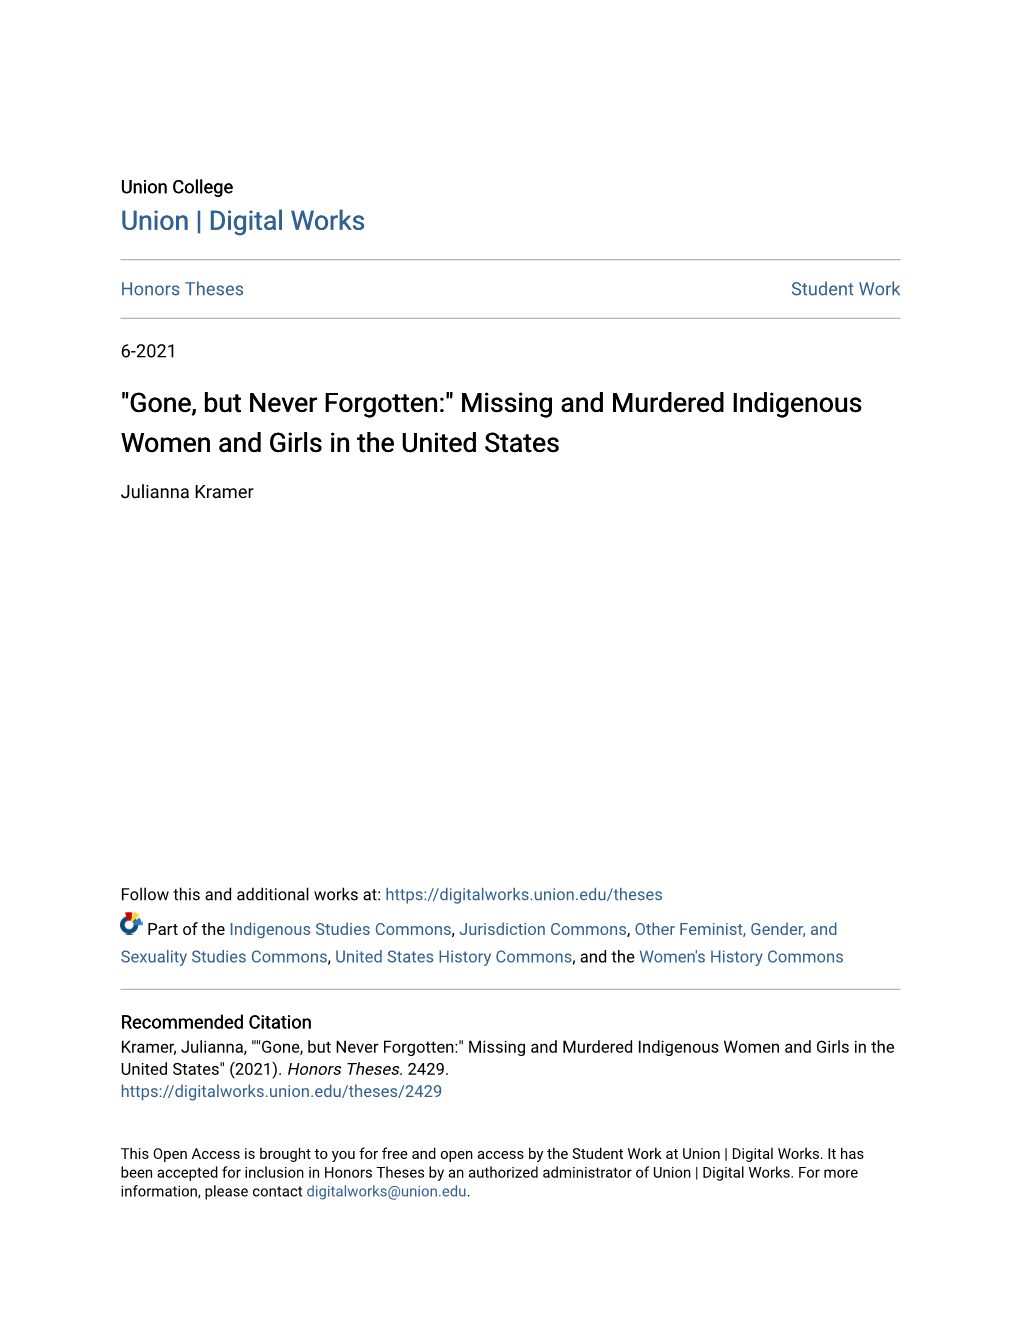 Missing and Murdered Indigenous Women and Girls in the United States